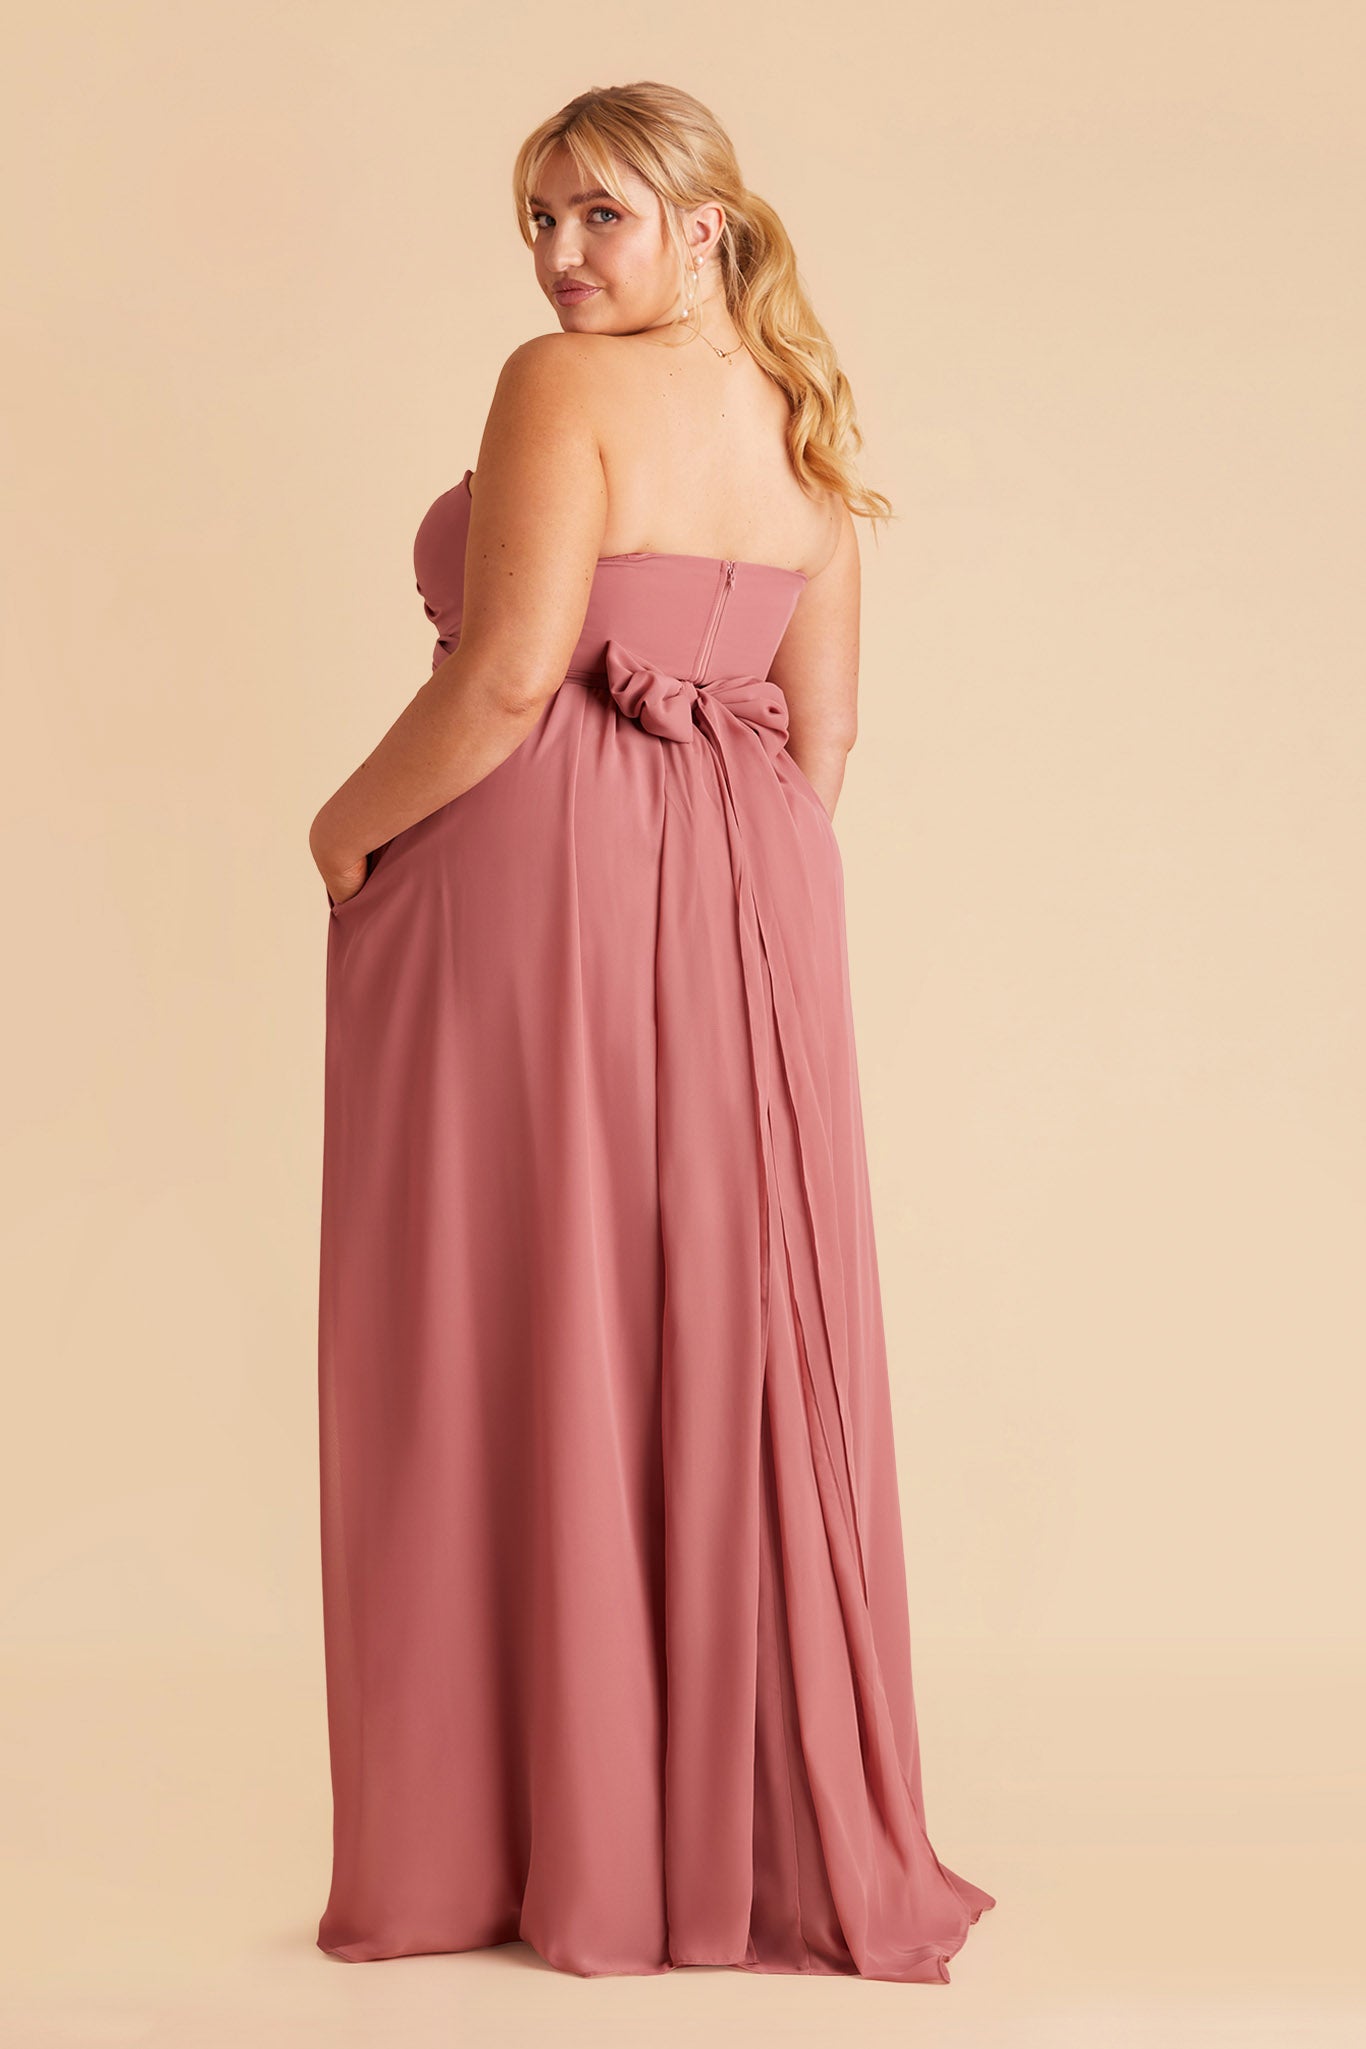 Grace plus size convertible bridesmaid dress in Mulberry Chiffon by Birdy Grey, back view